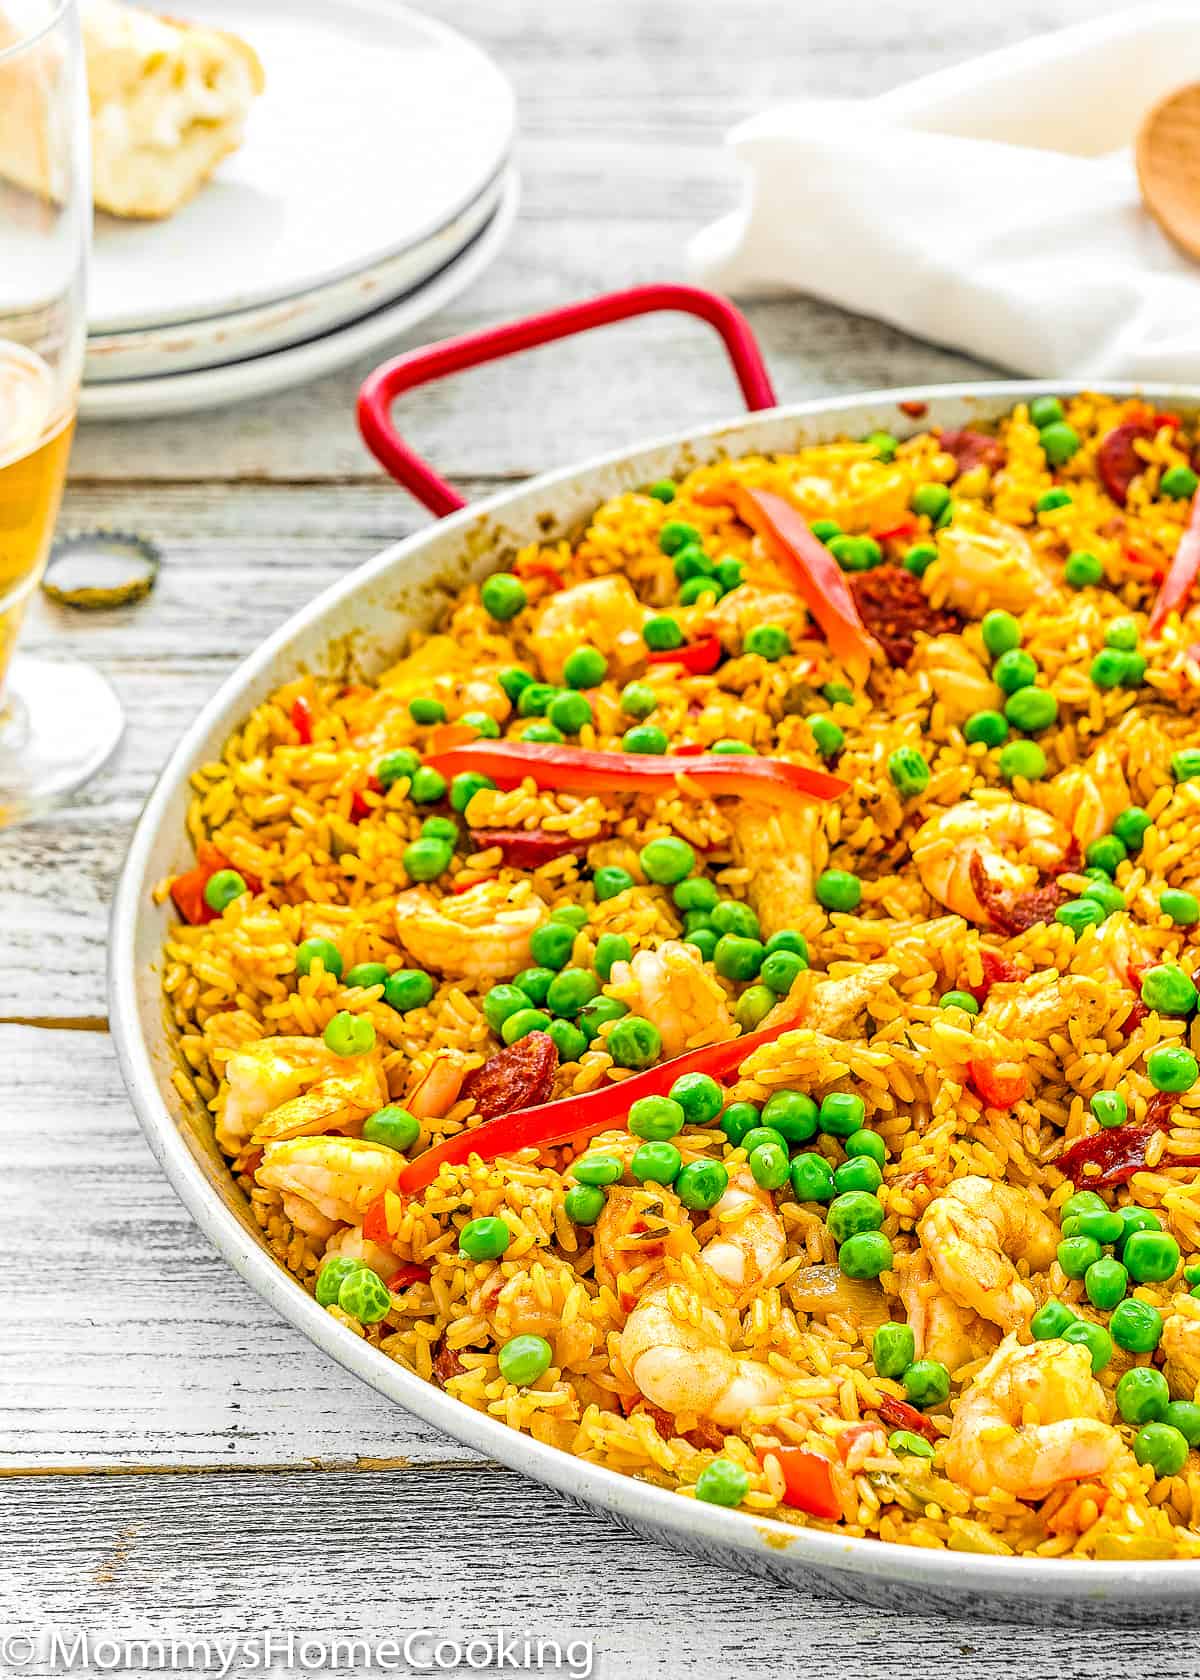 Spanish Paella in a paella pan with plate and a cup of beer in the background.